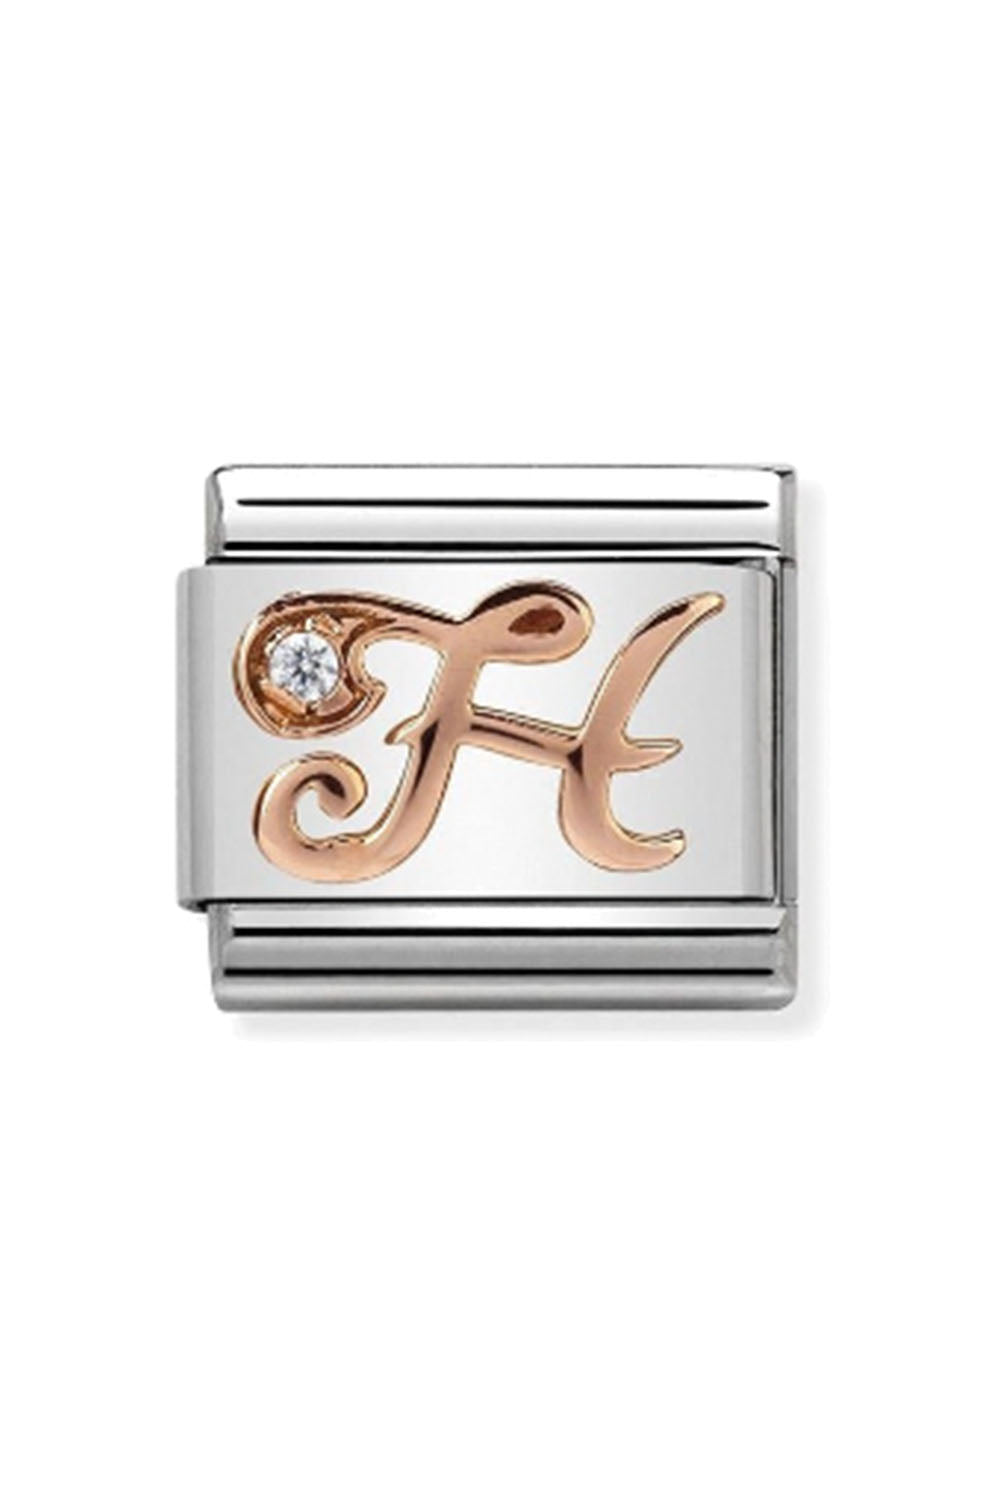 LETTERS 9k rose gold and CZ H